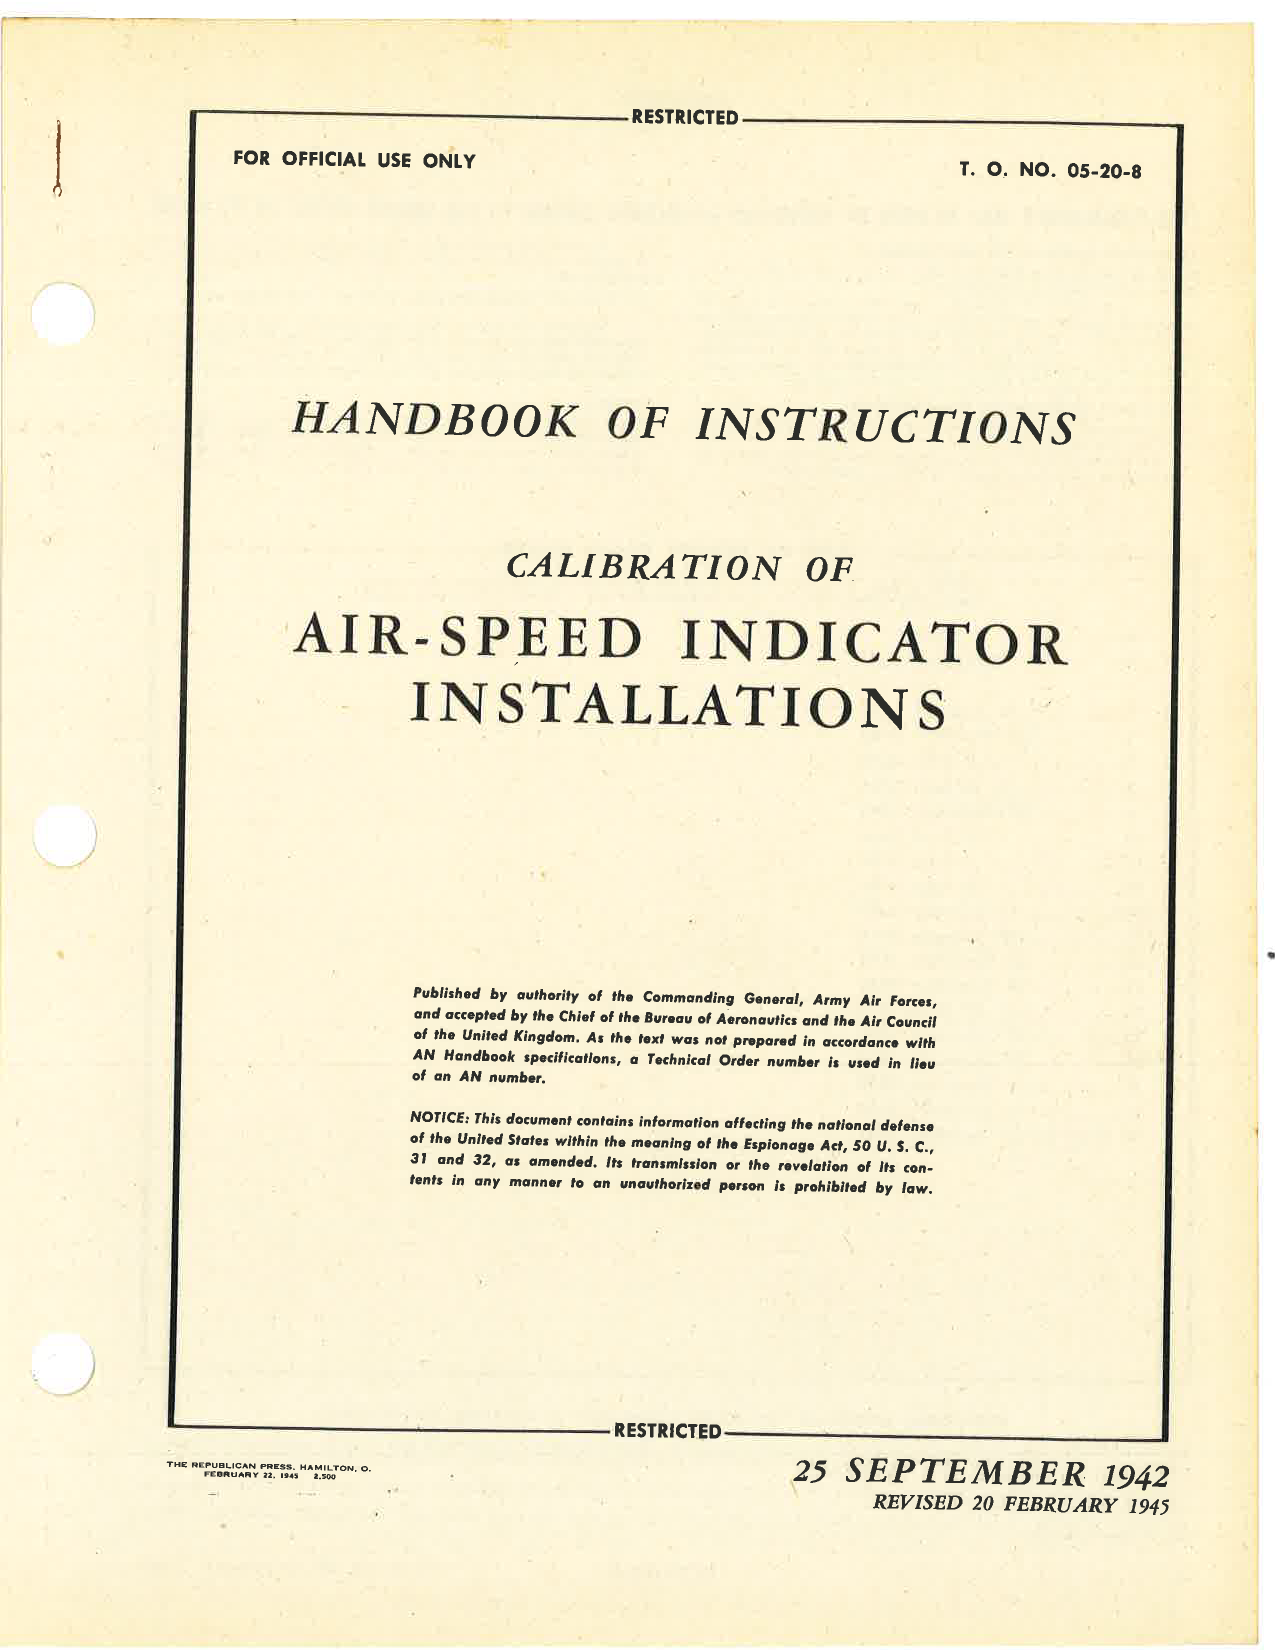 Sample page 6 from AirCorps Library document: Instructions for Calibration of Airspeed Indicator Installations